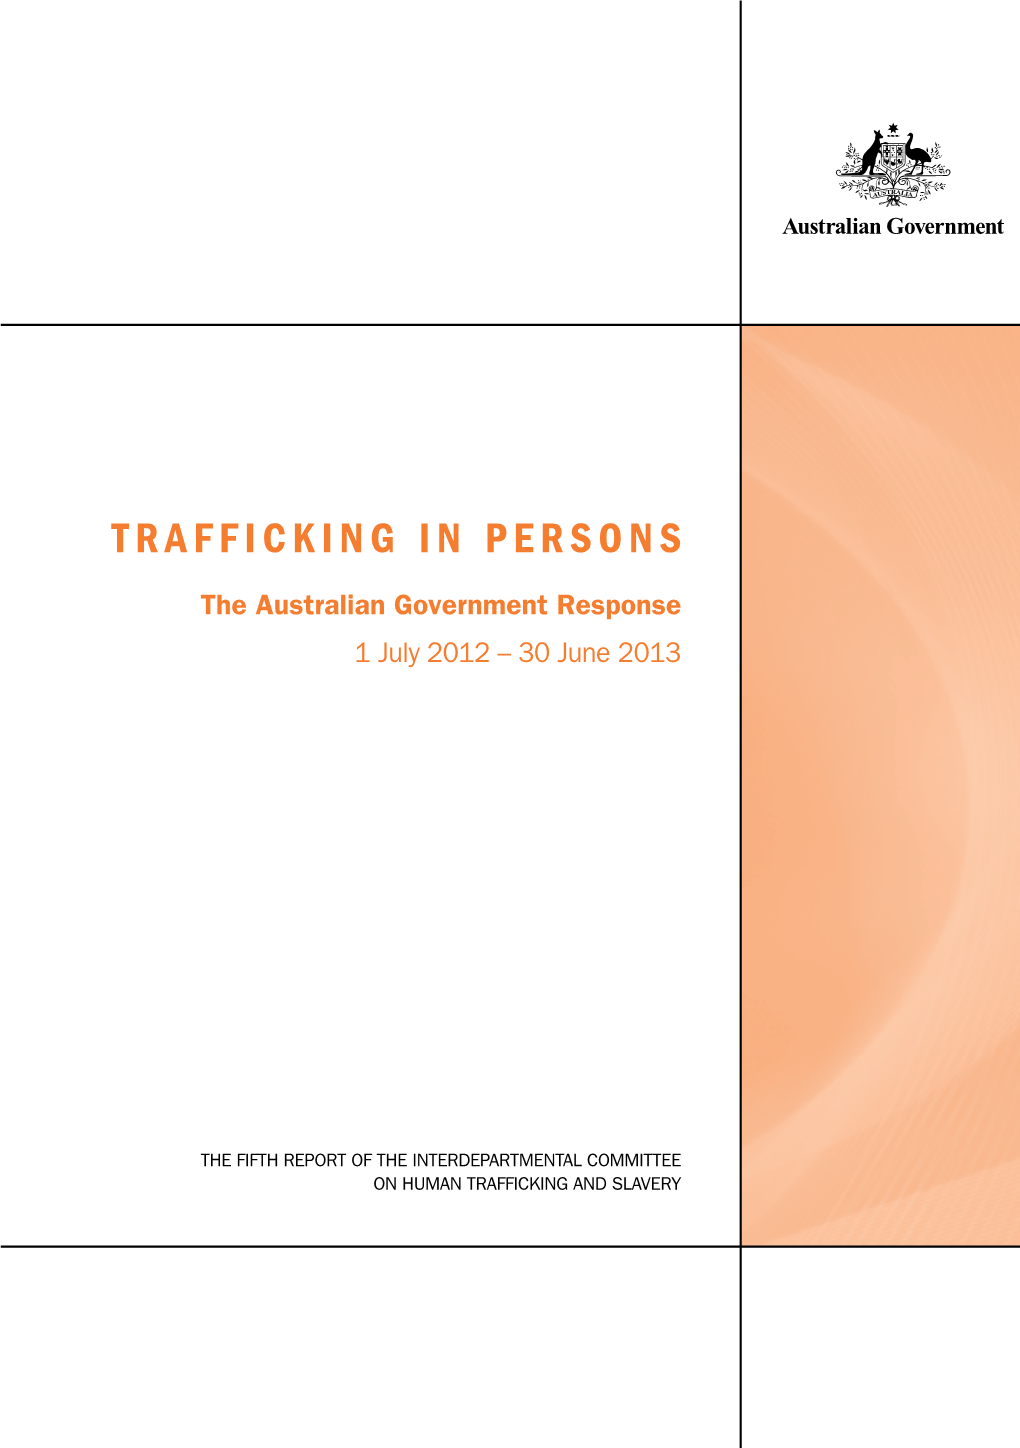 Report of the Interdepartmental Committee on Human Trafficking and Slavery